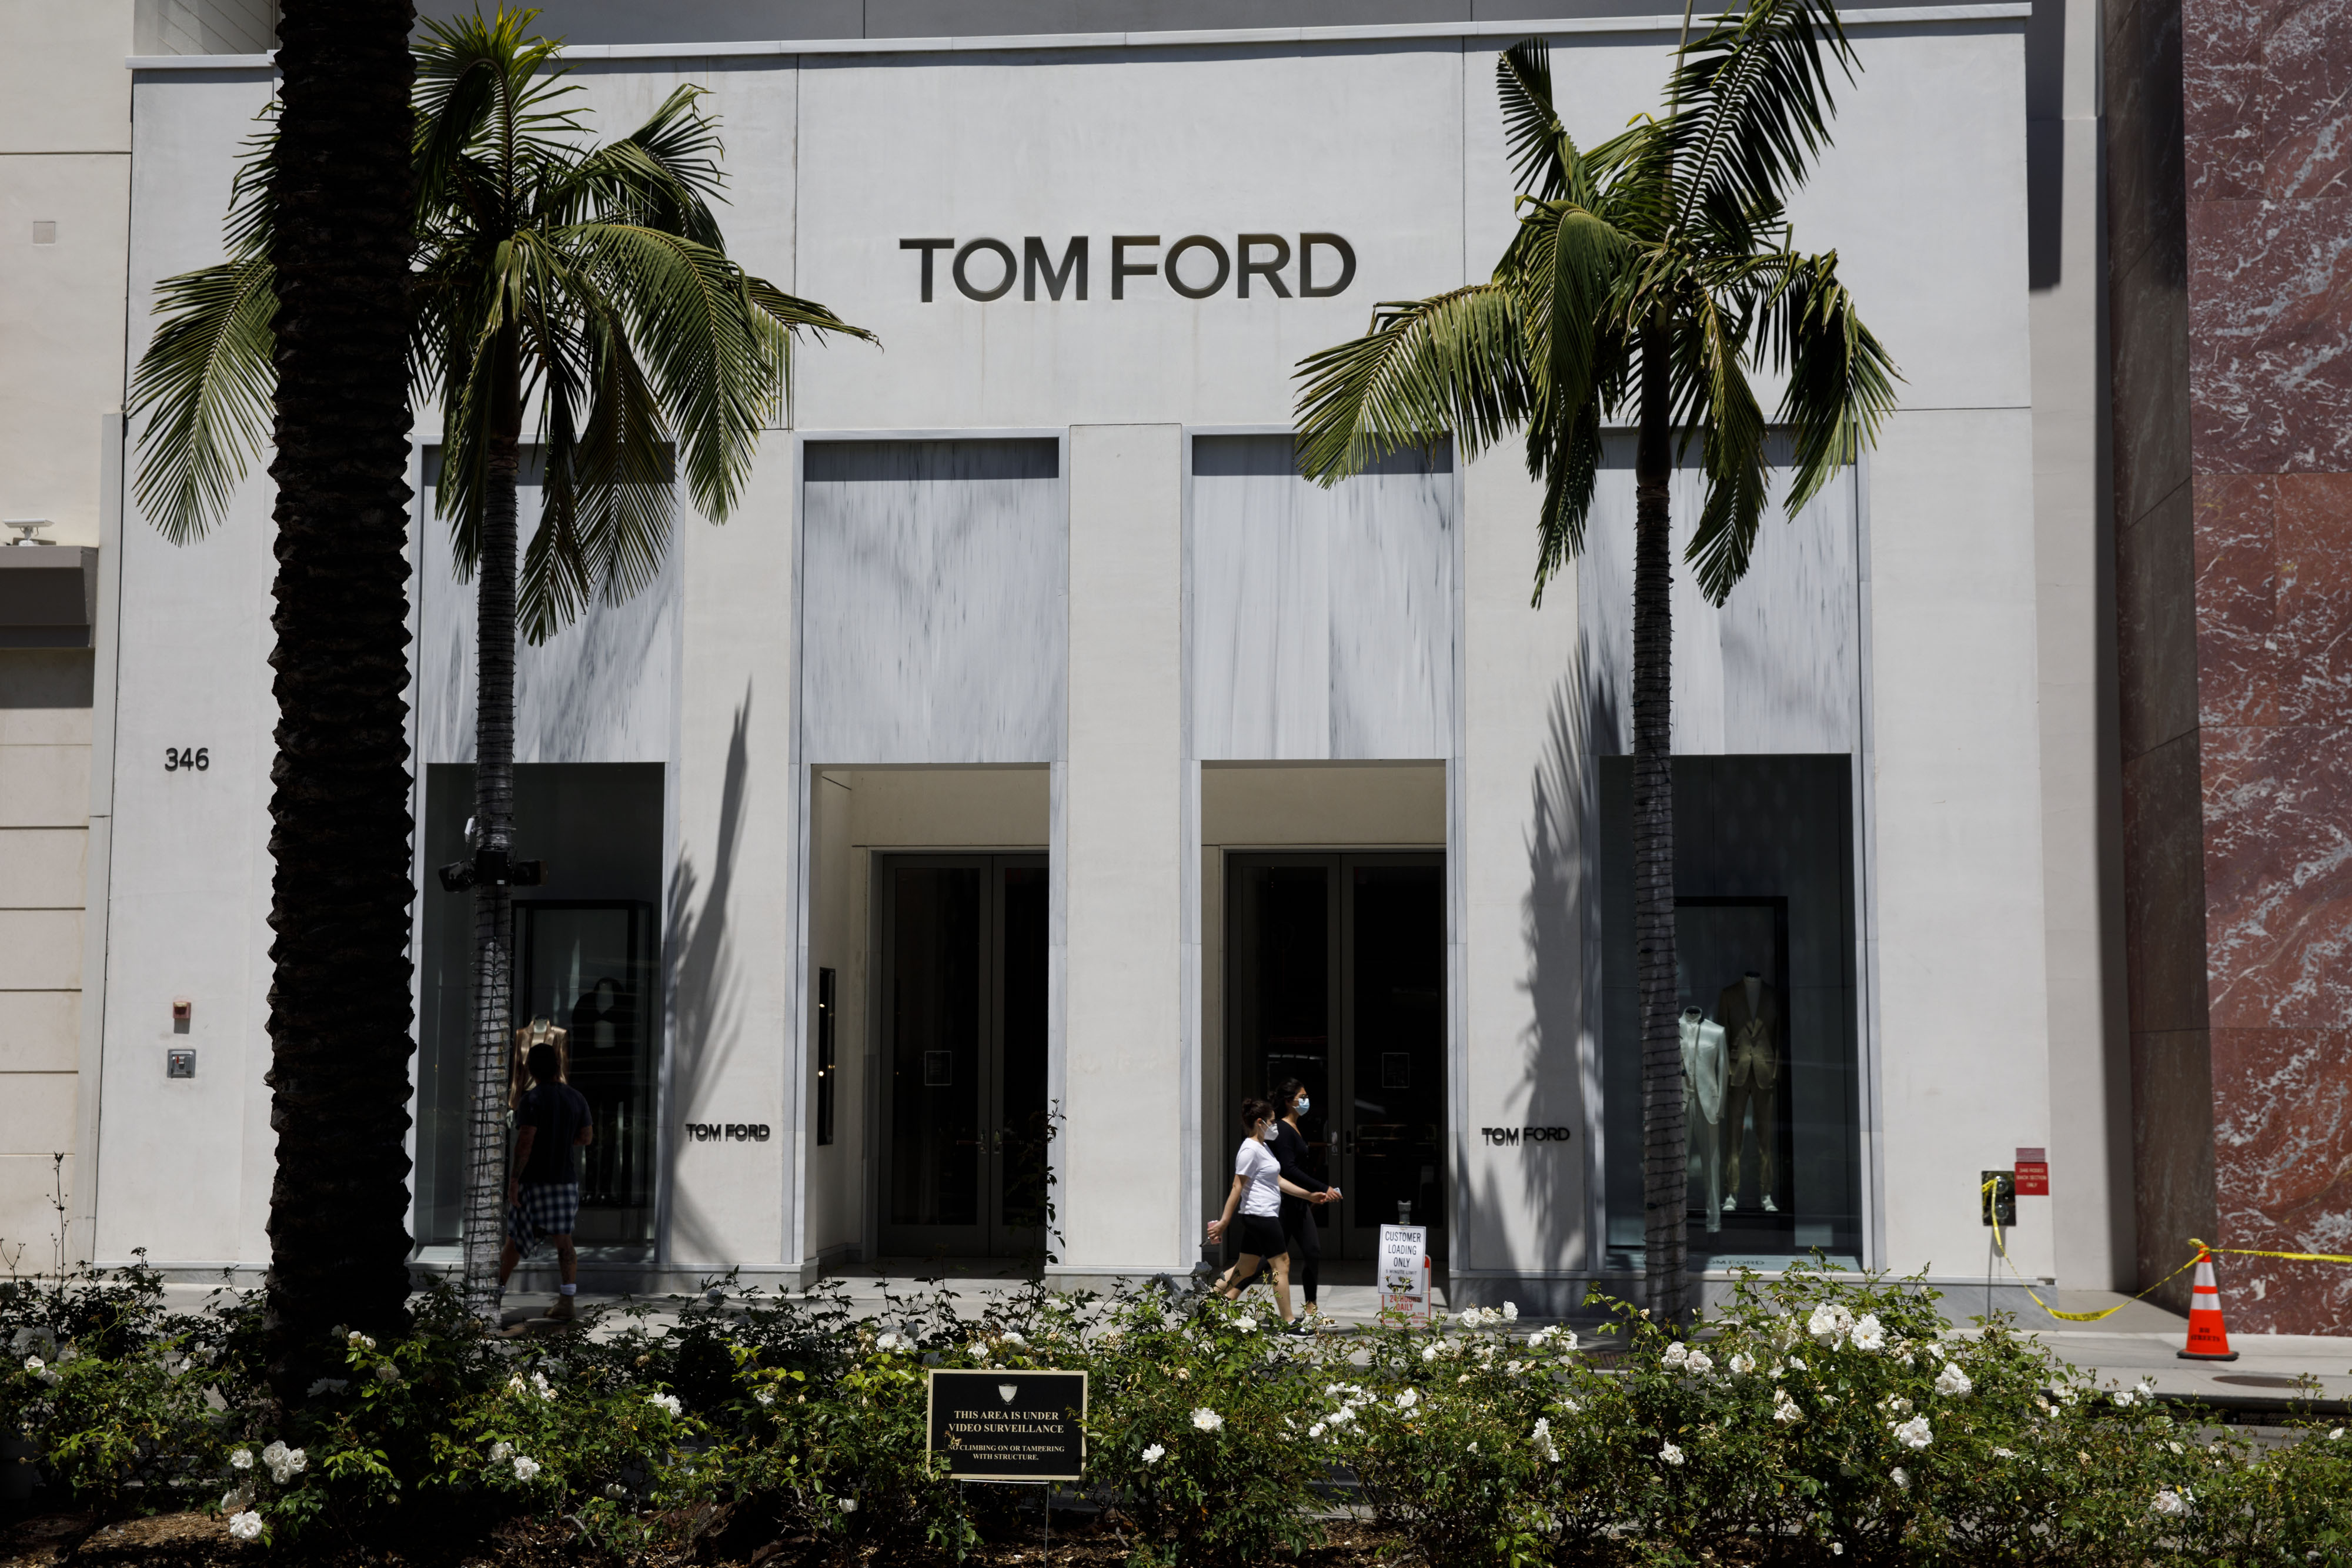 Chanel to Tom Ford: The rise of online stores that sell luxury